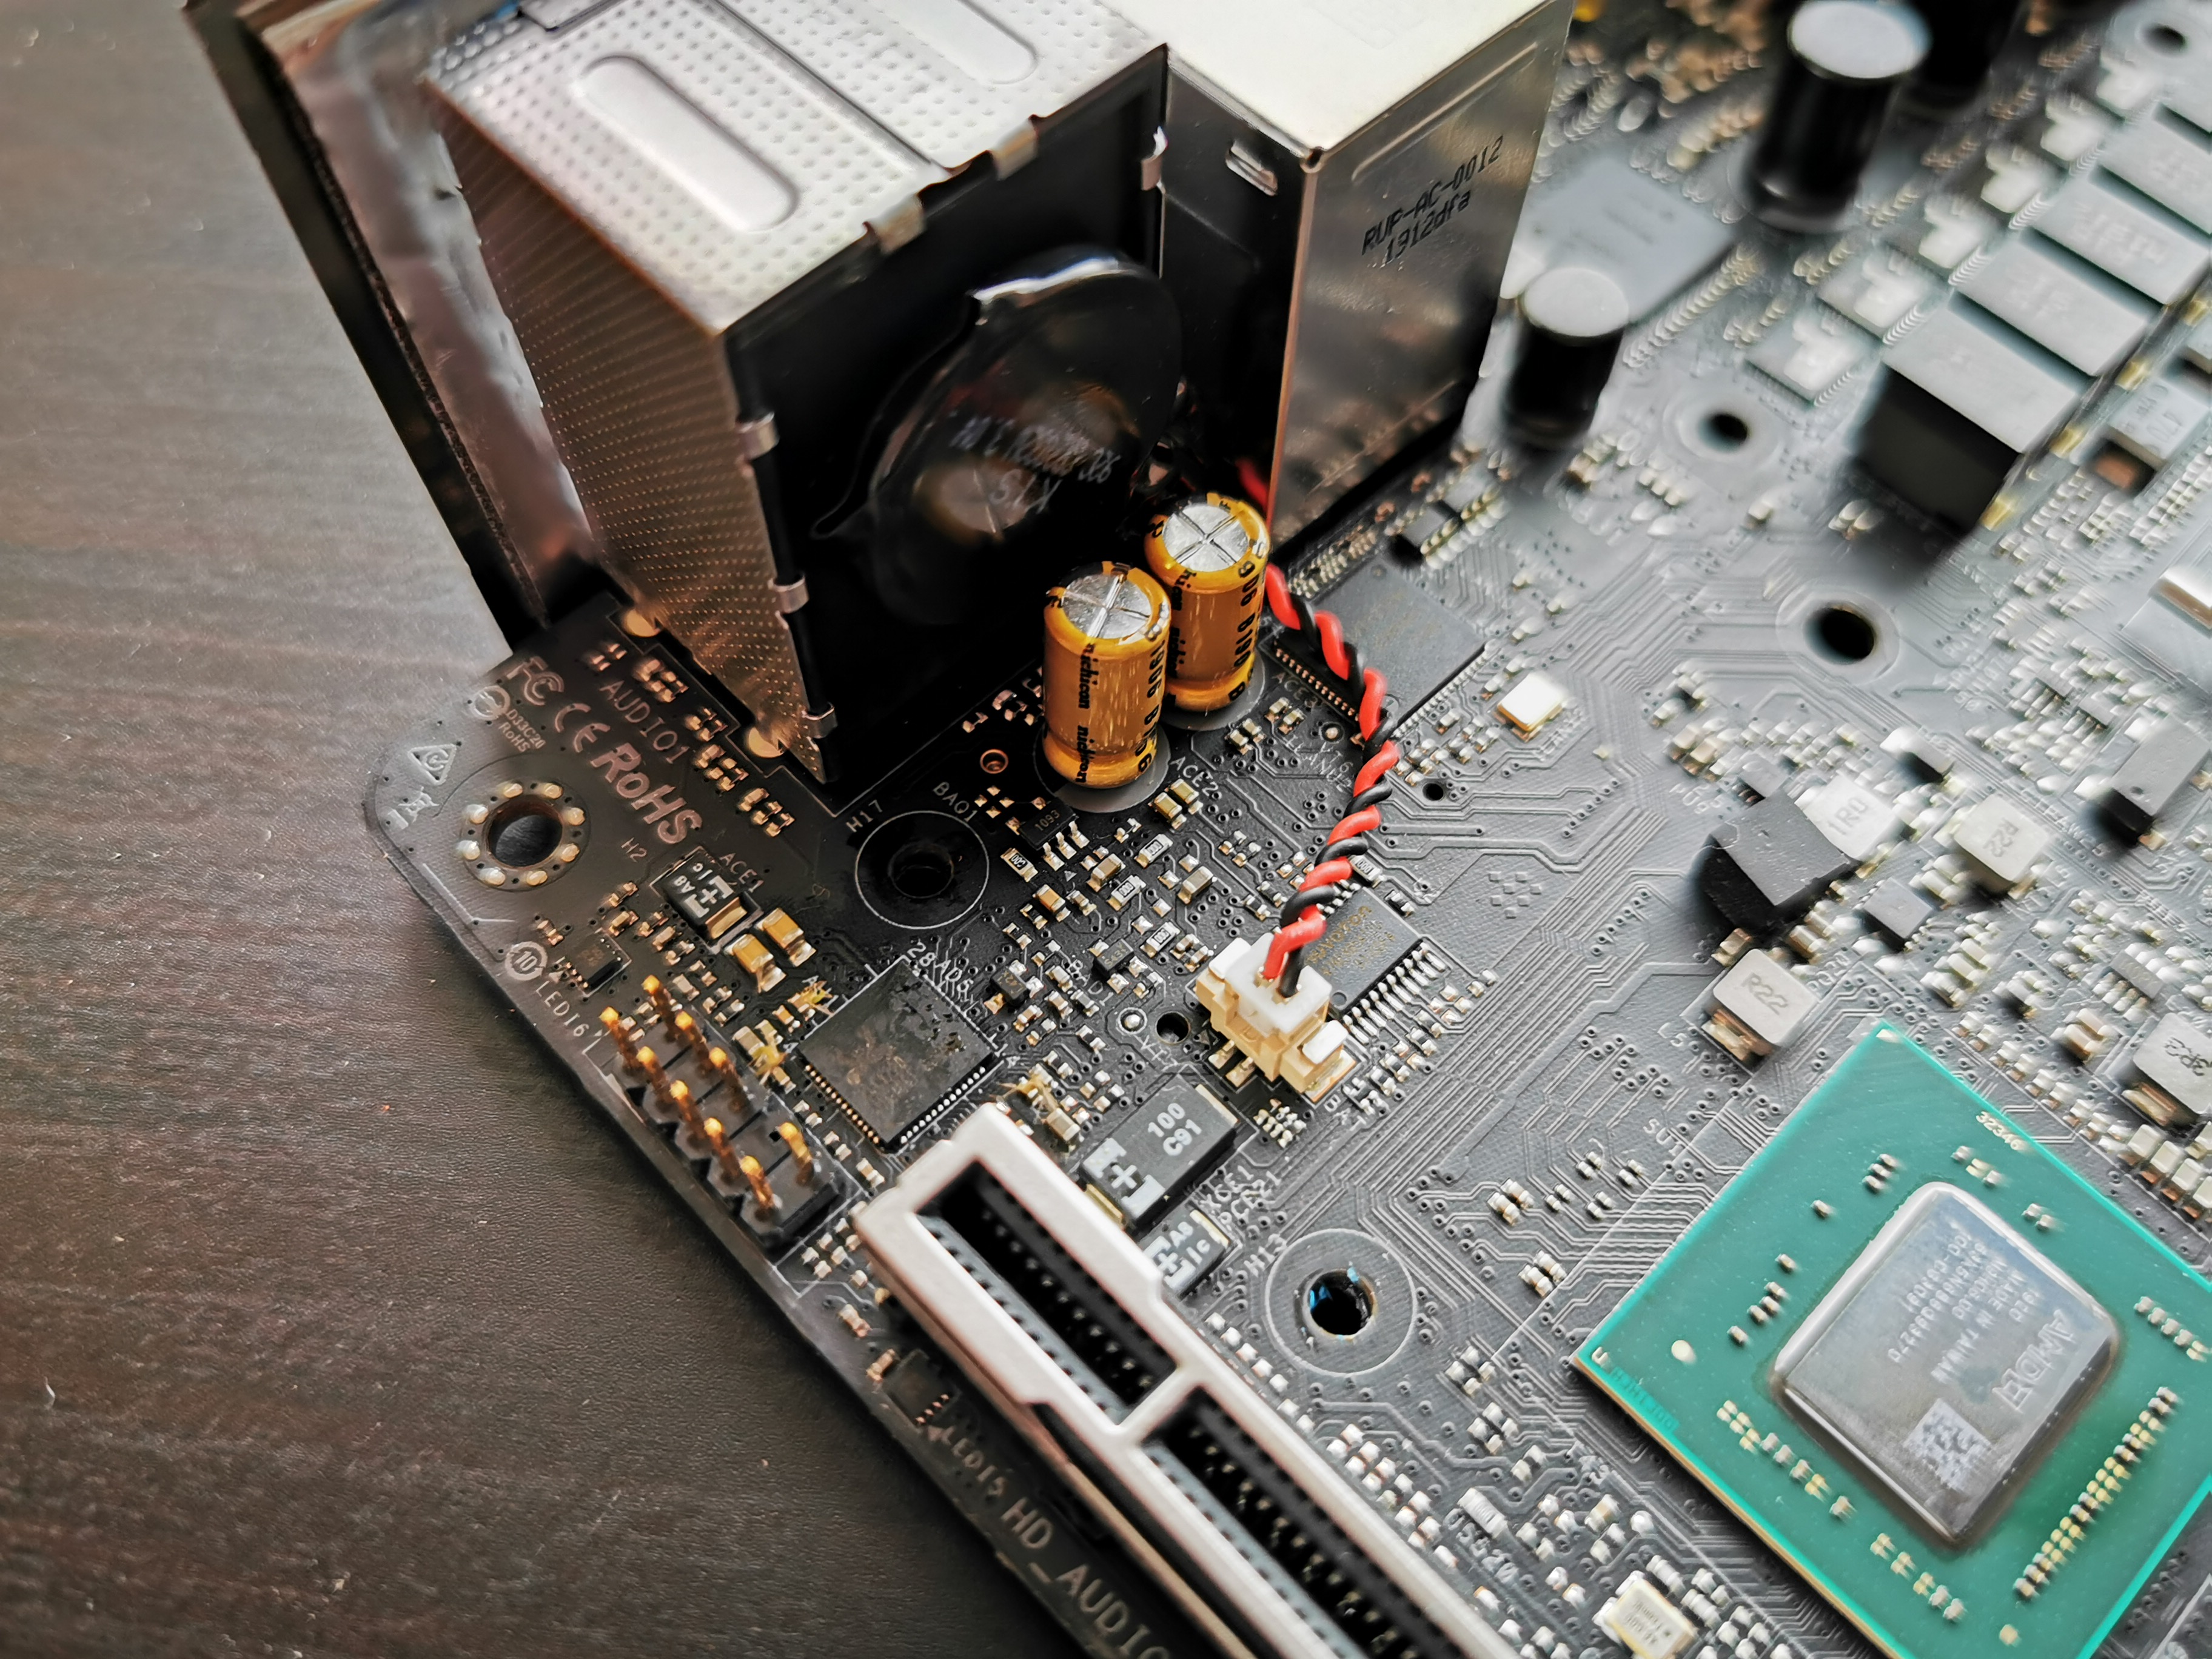 tema semafor At deaktivere Where is the CMOS Battery on Asrock ITX boards? : r/buildapc